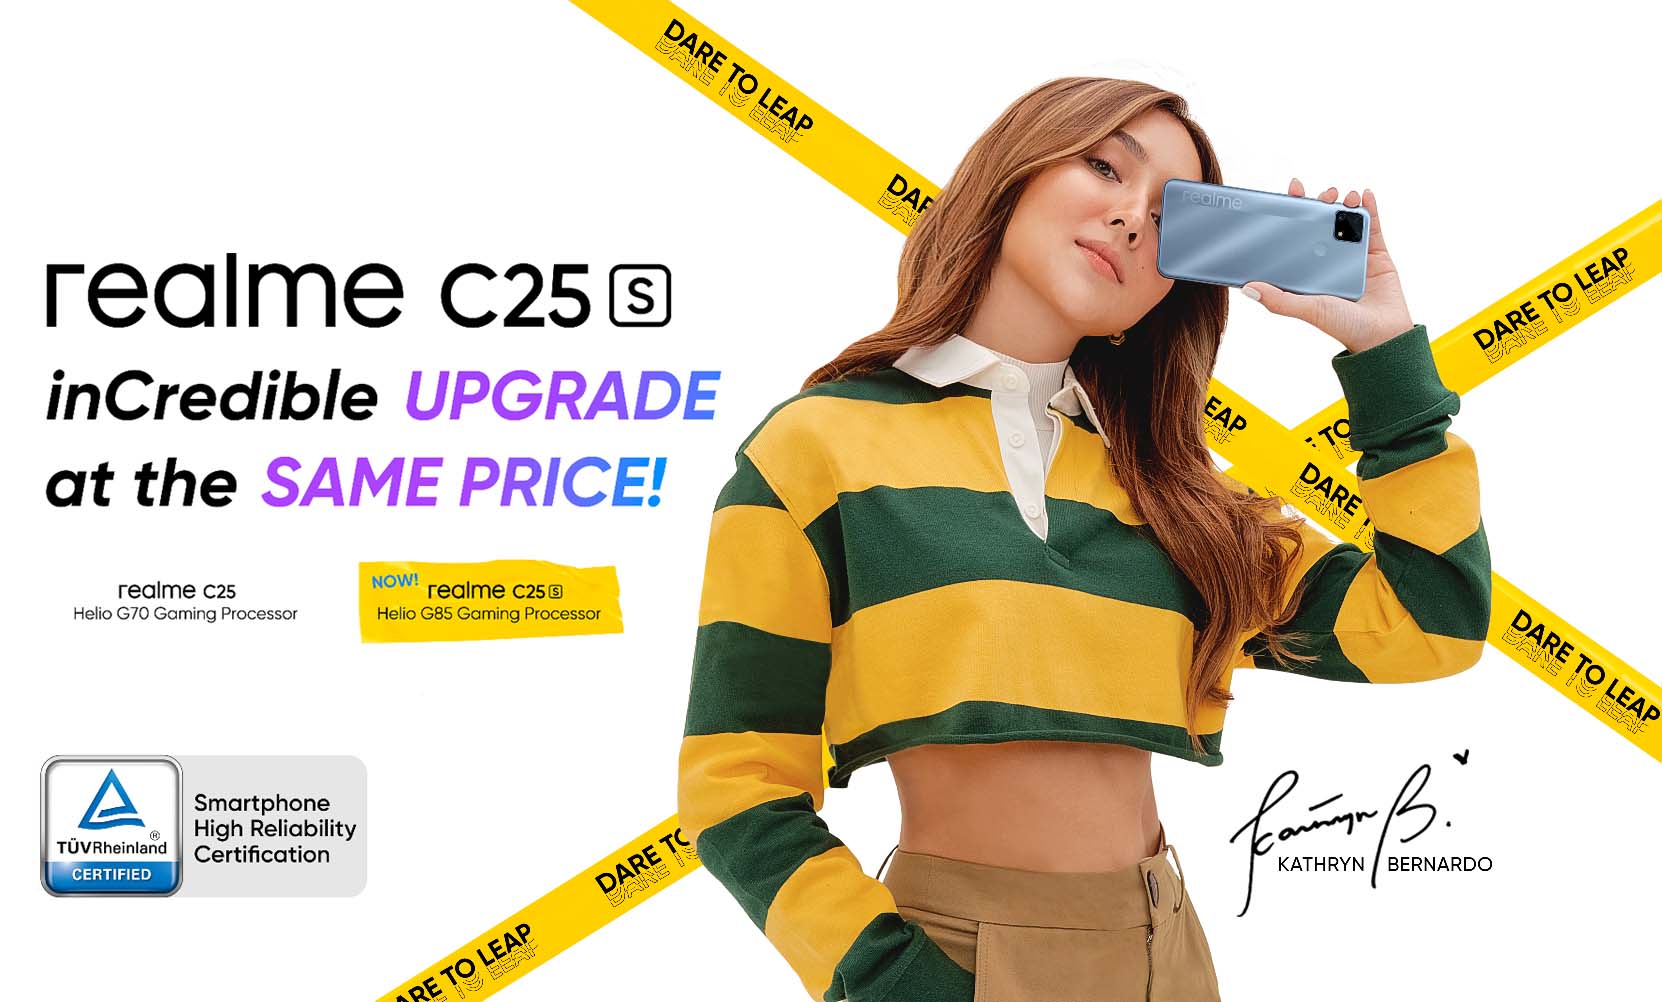 realme C25S launches in the PH on June 15 availablee Shopee for as low as PHP 6,490